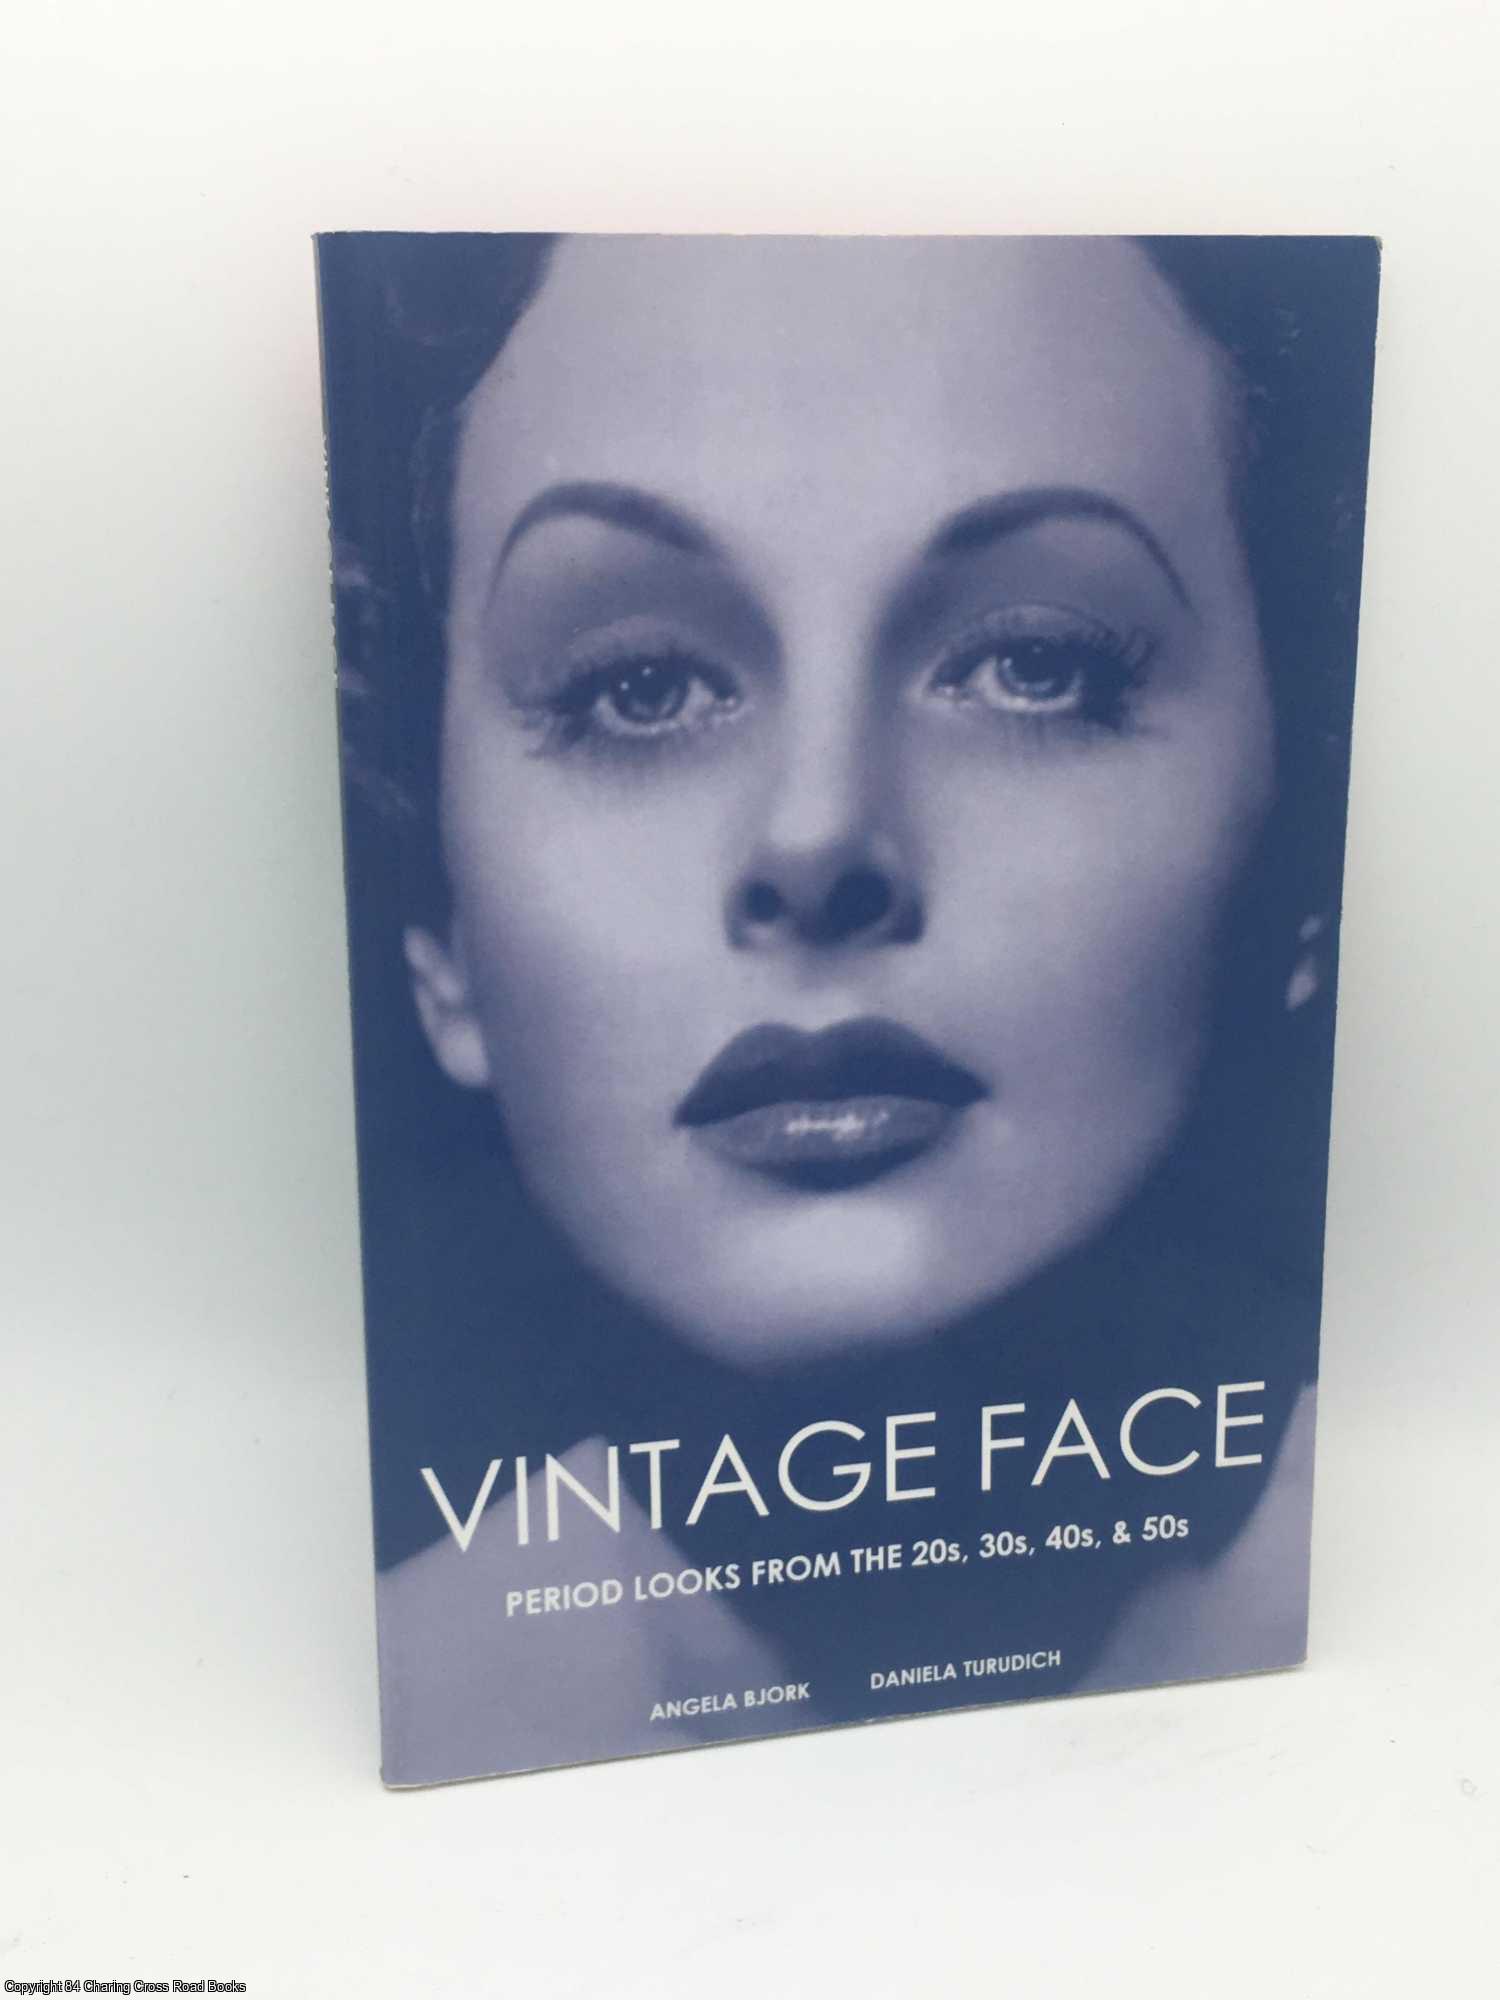 Turudich, Daniela, Bjork, Angela - Vintage Face: Period Looks from the 20s, 30s, 40s, & 50s